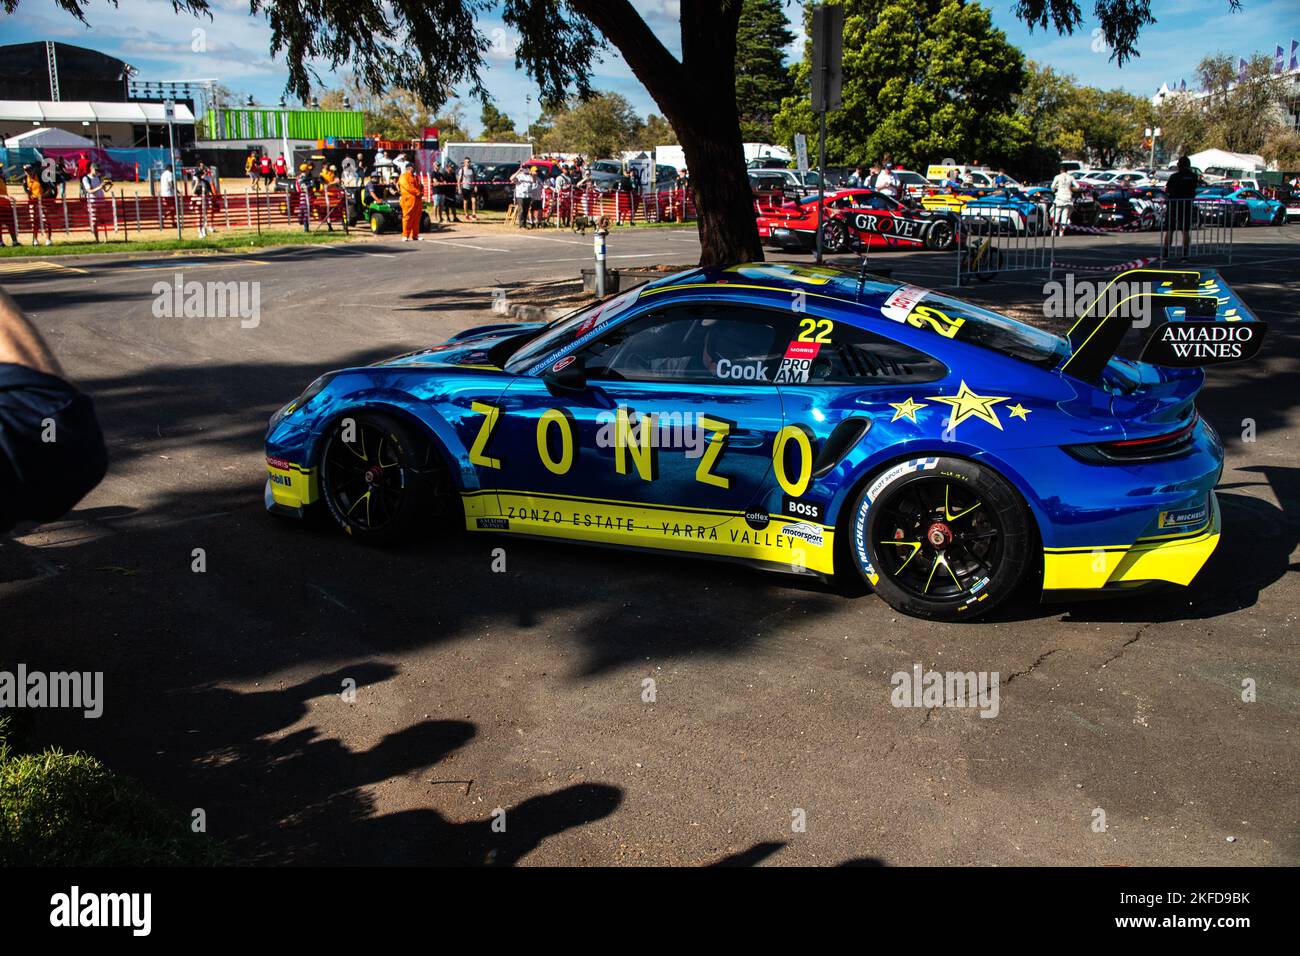 Zonzo Blue Porsche Carrera down at Albert Park Track for the Carrera Cup as all the colorful cars come down to the track and get ready to race. Stock Photo